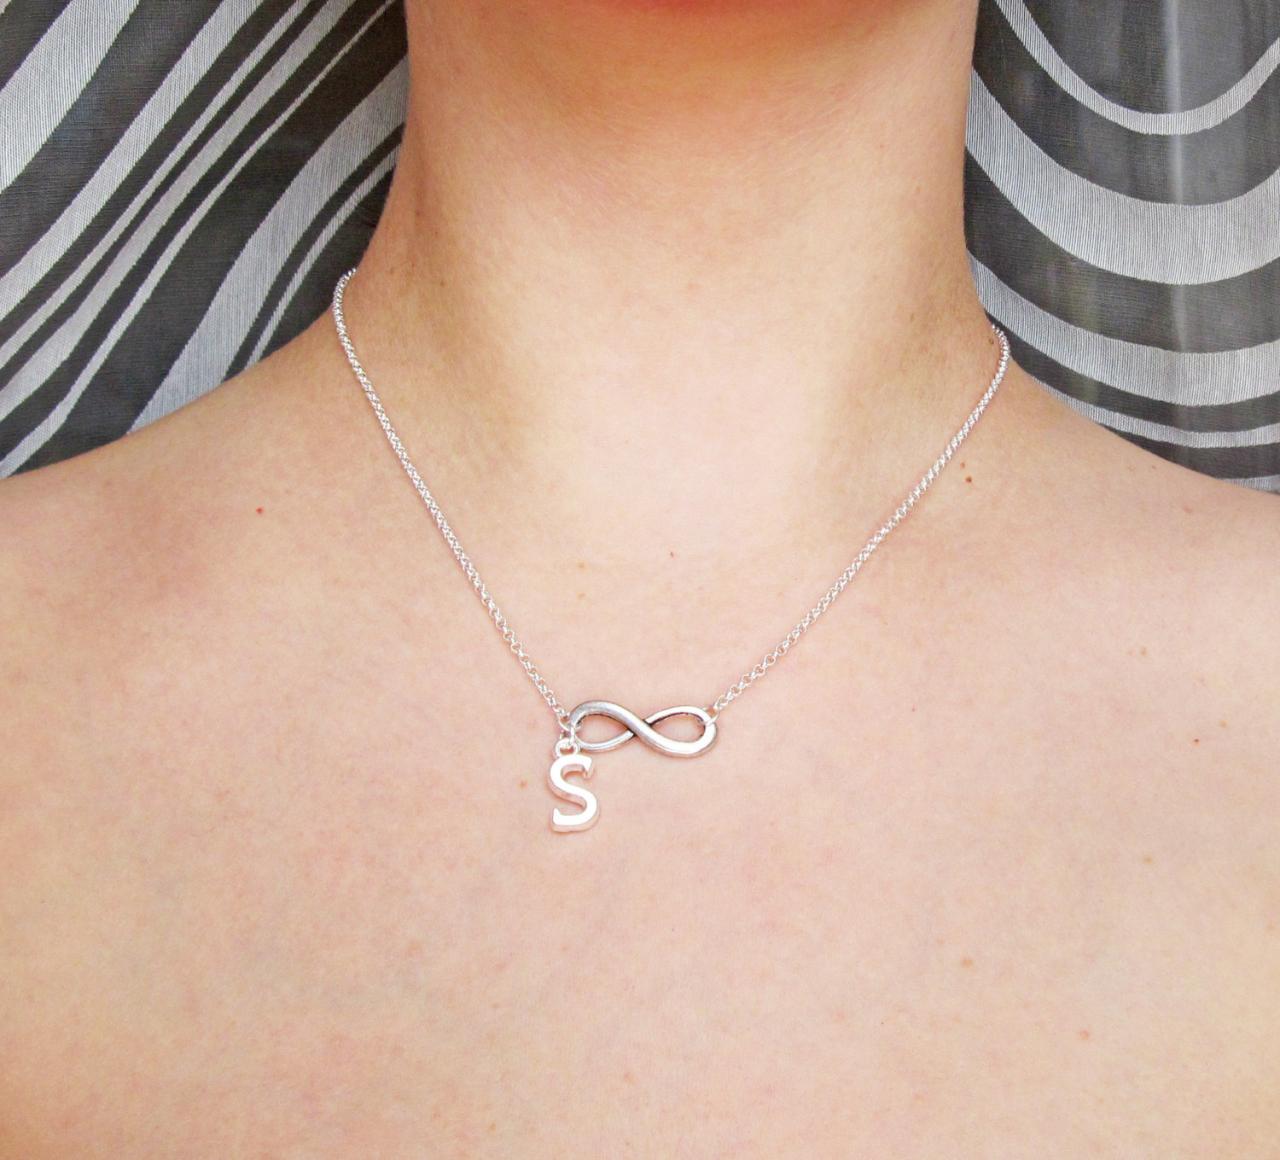 Infinity Necklace, Initial Jewelry, Personalized Initial Necklace, Wedding Necklace, Graduation Necklace, Mother's Day Gift, Silver